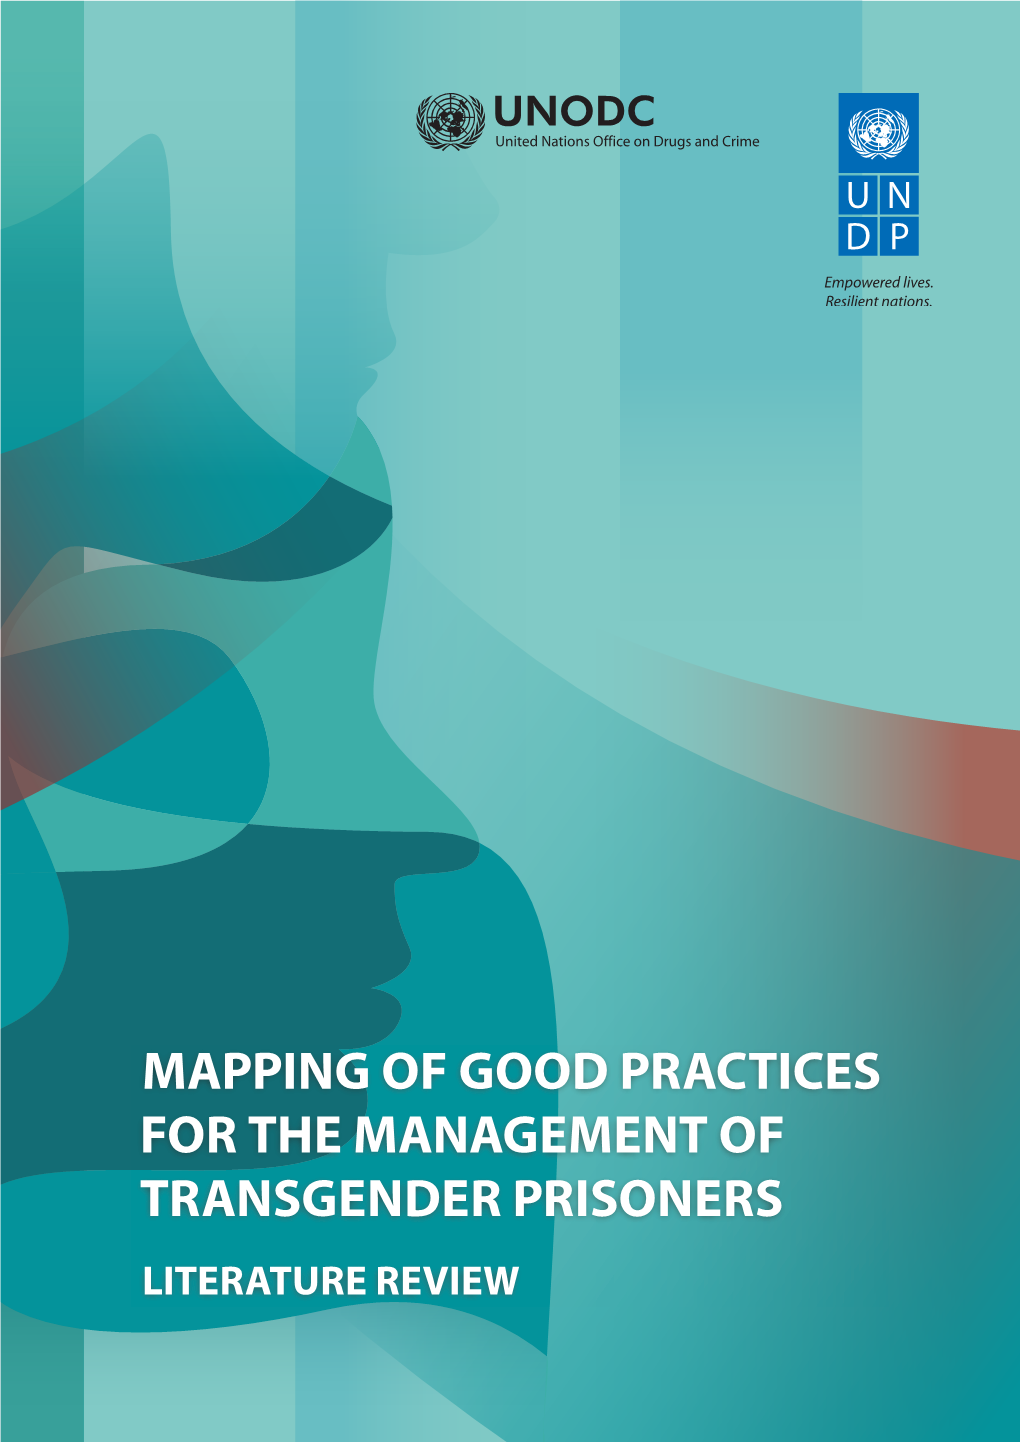 Mapping of Good Practices for the Management of Transgender Prisoners Literature Review Undp (2020)